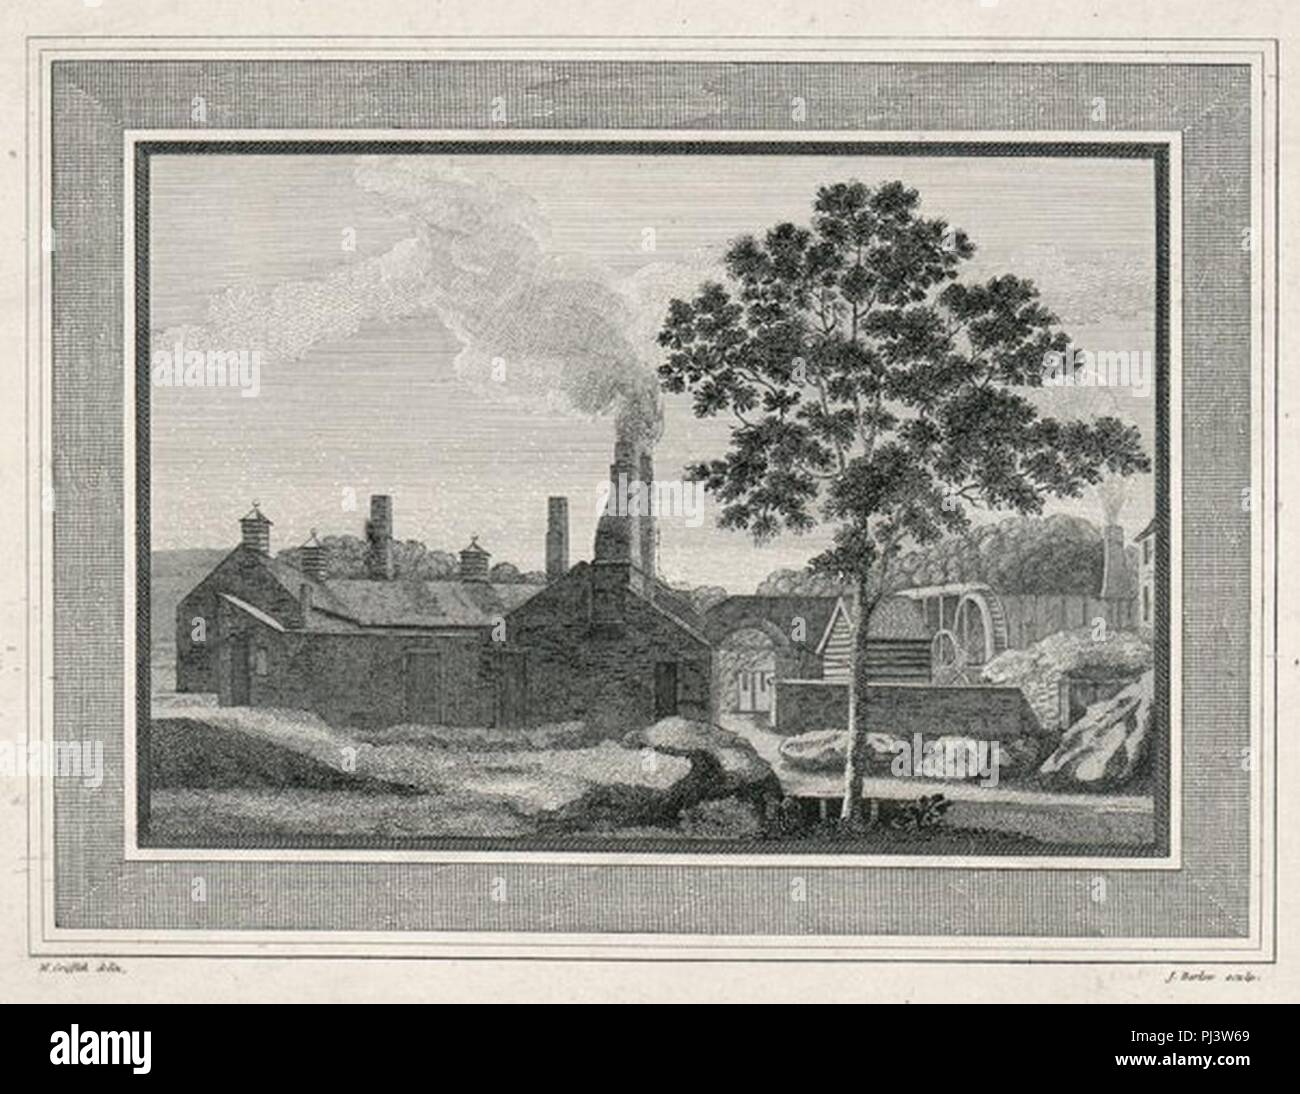 Bank side smelting works near Greenfield. Stock Photo